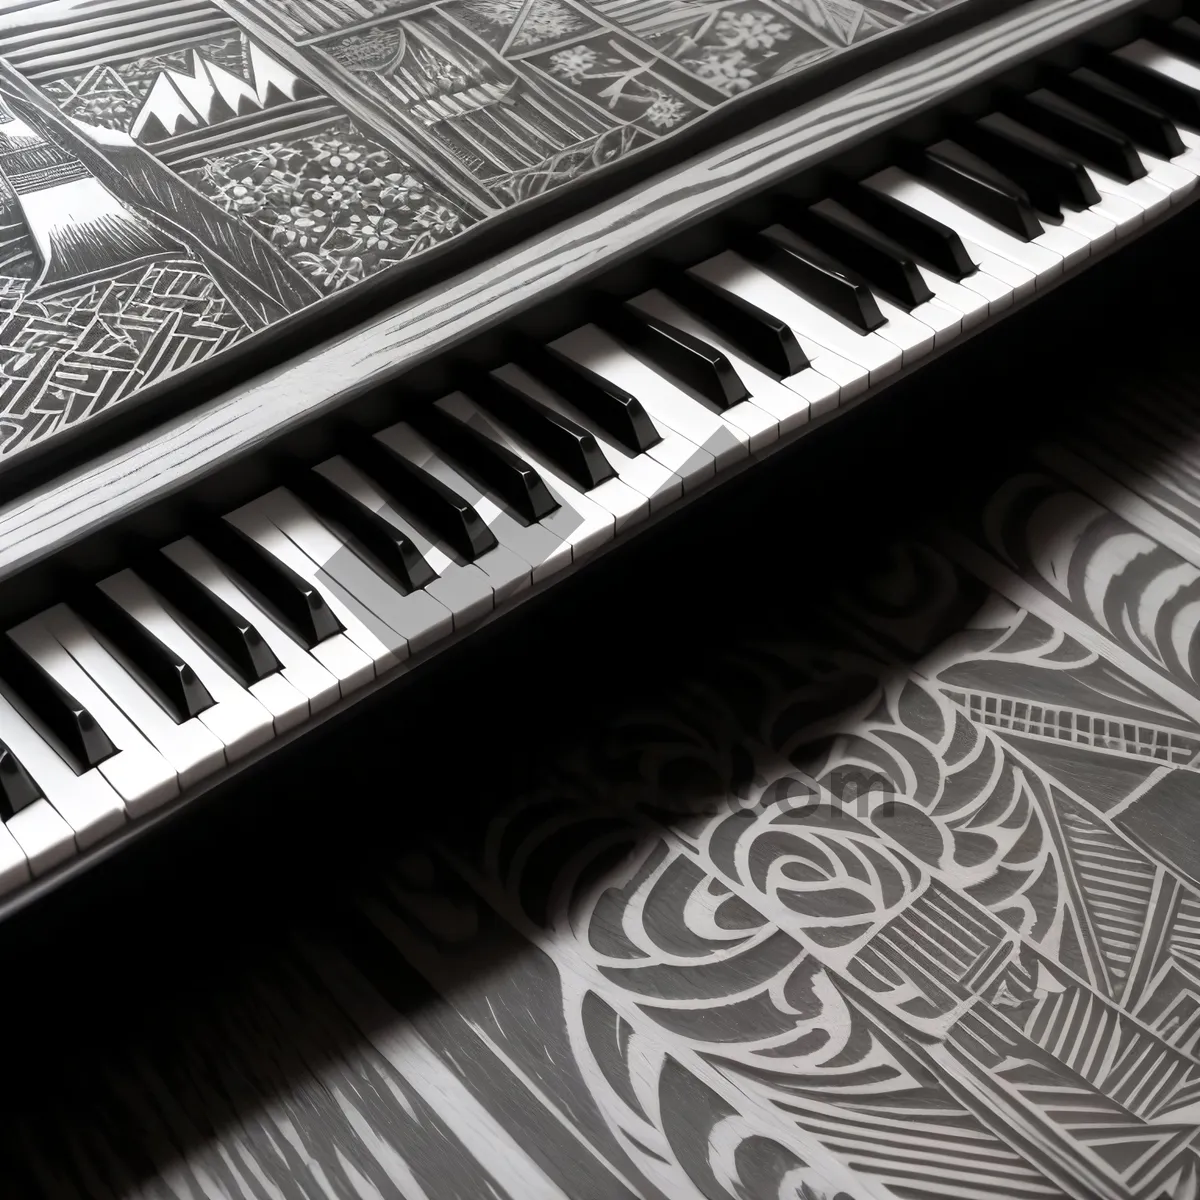 Picture of Black Upright Piano Keyboard Instrument